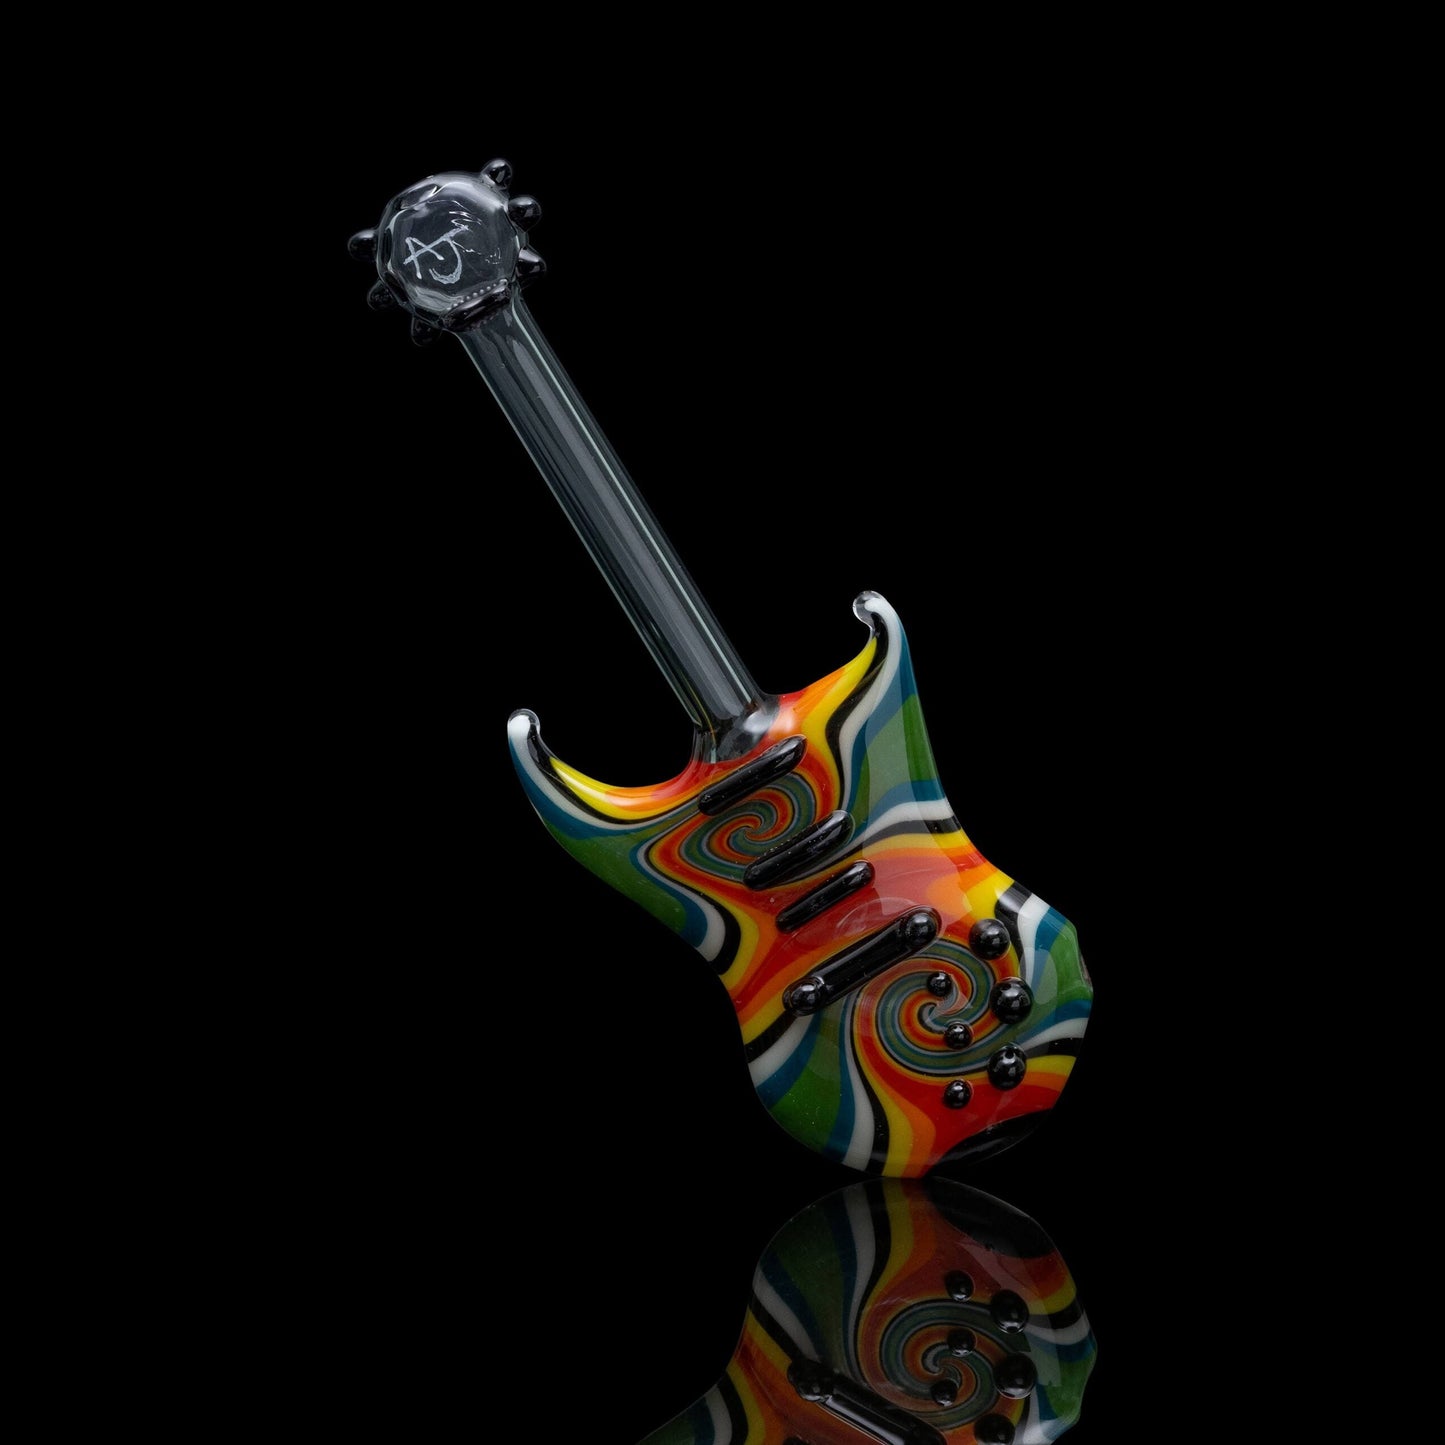 exquisite design of the Wig Wag Guitar Pipe (H) by AJ Roberts